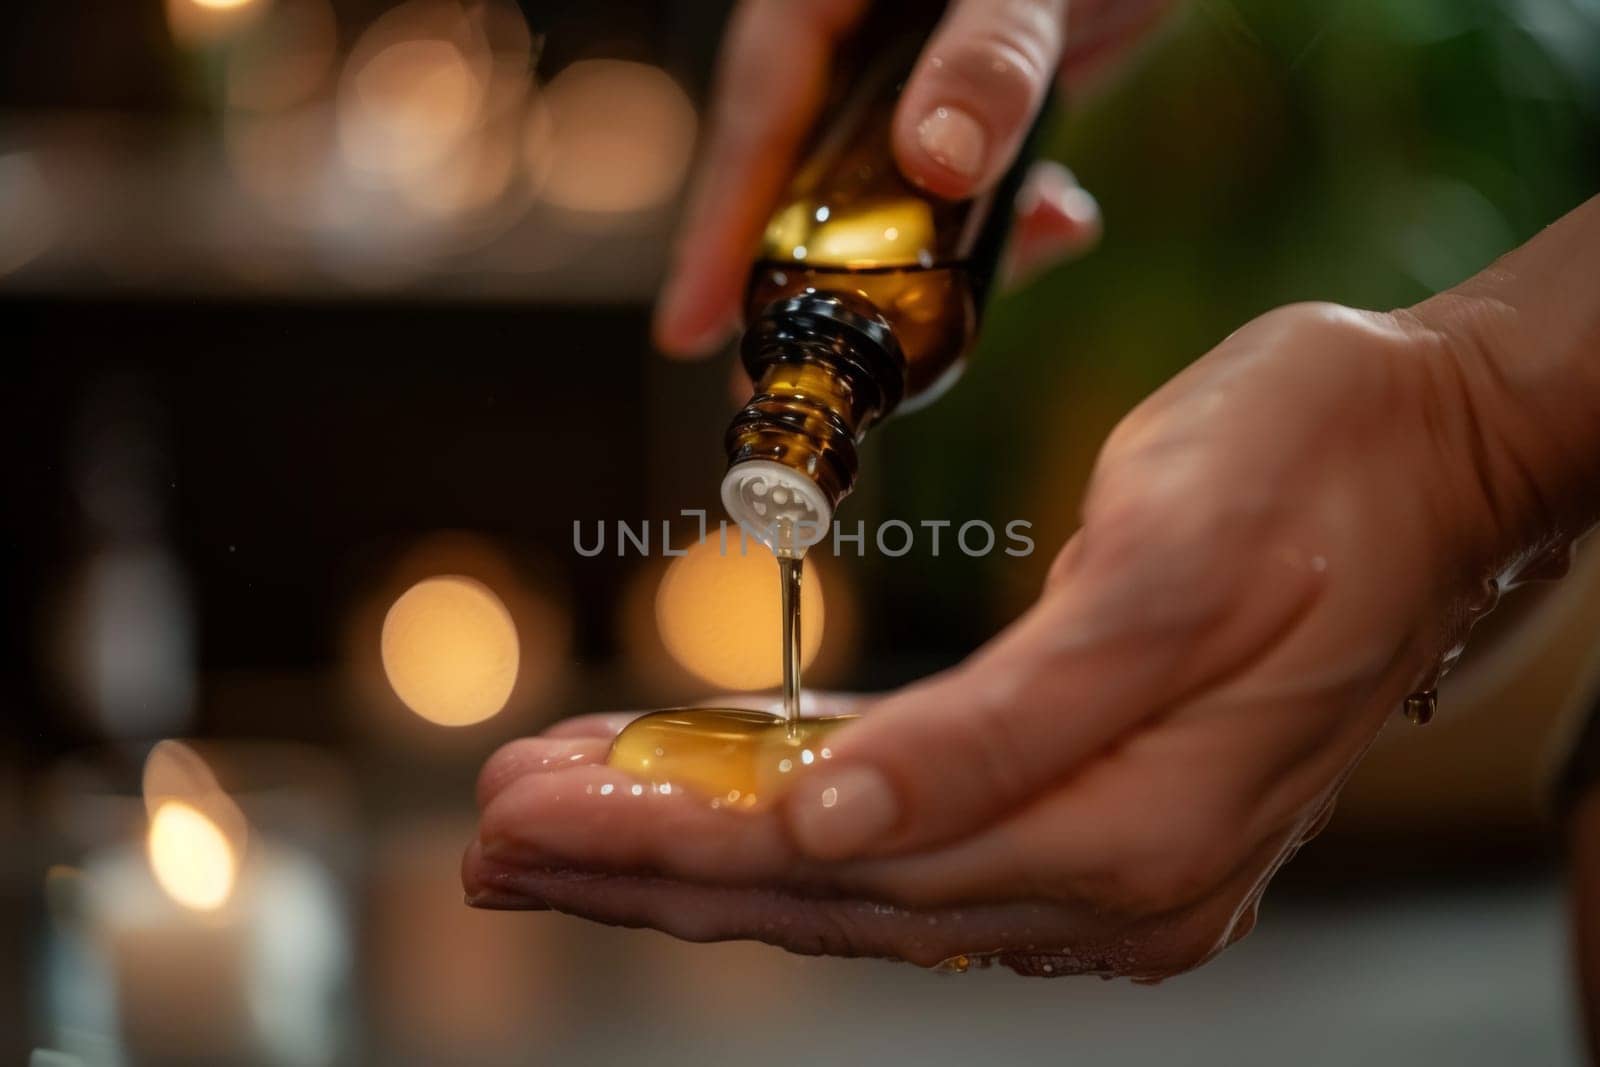 Pouring Oil in Hand for Foot Treatment by andreyz